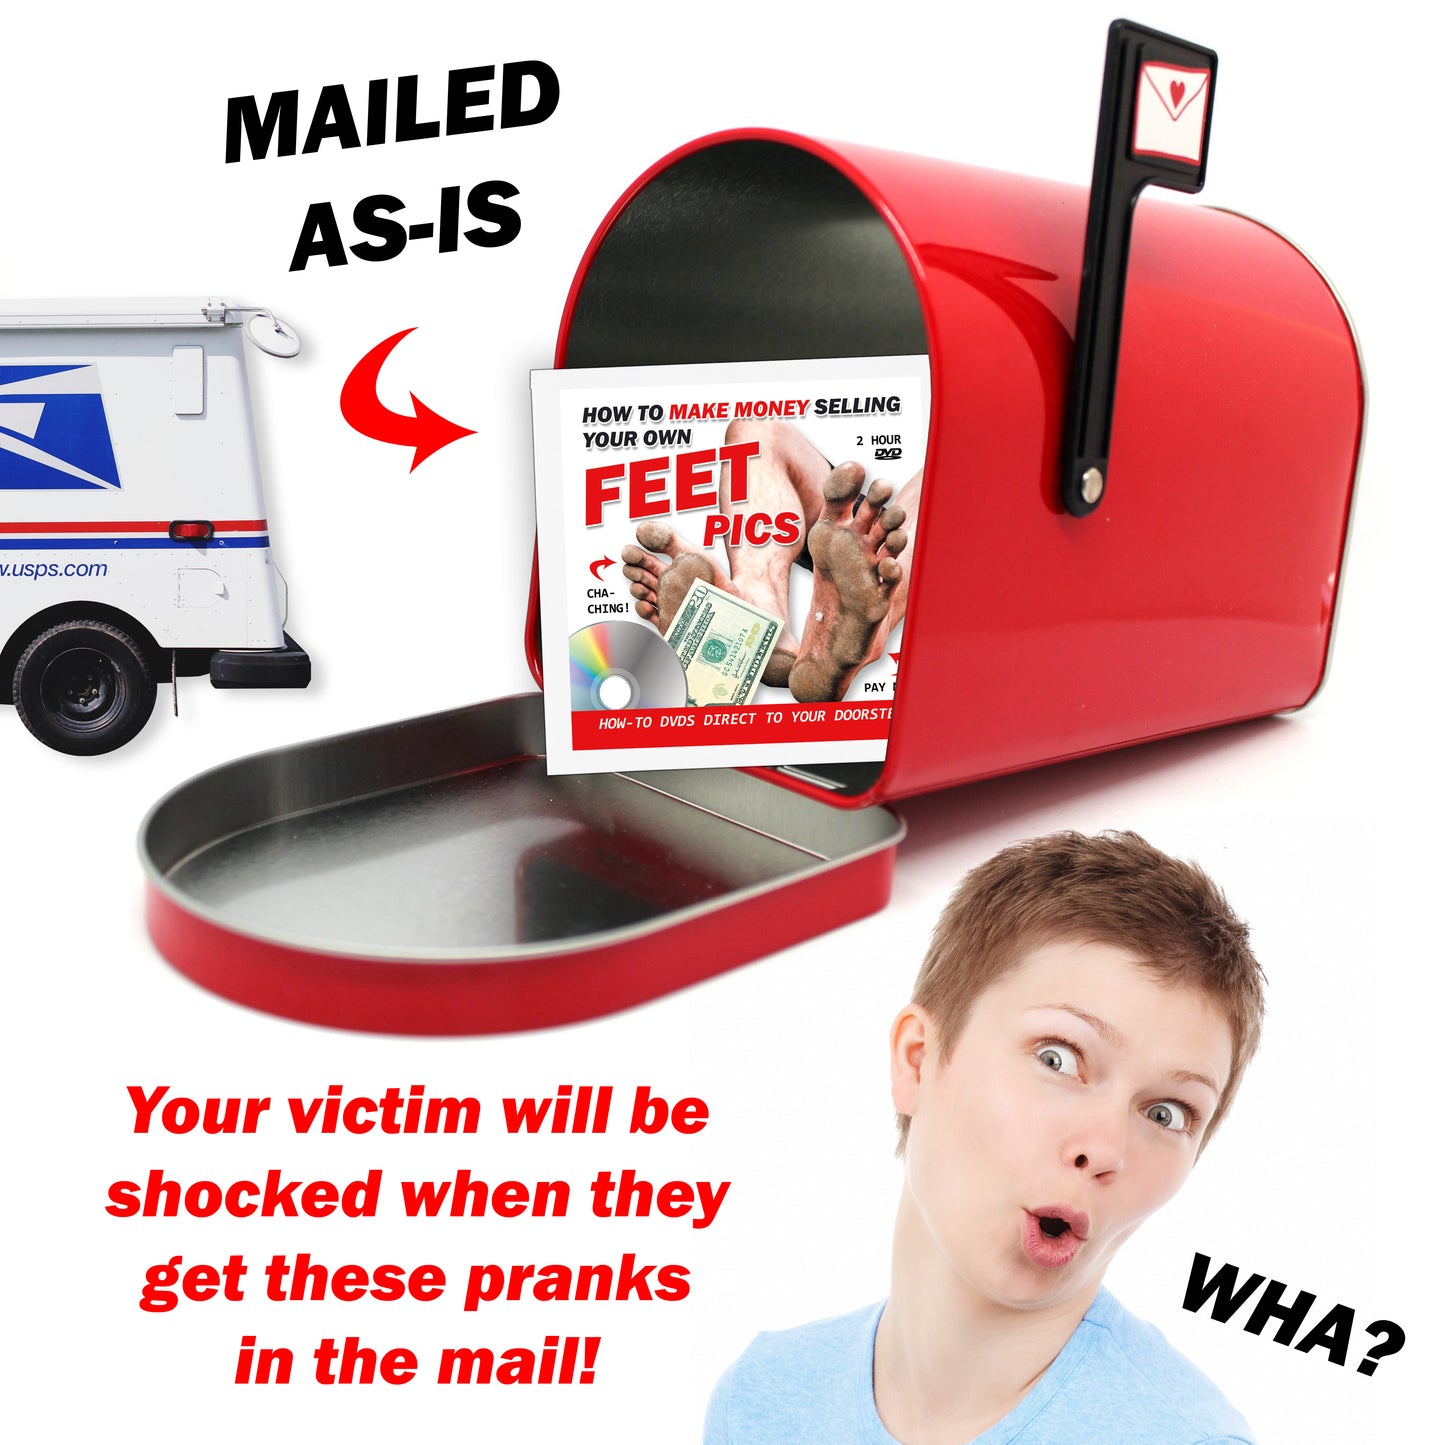 How To Make Money Selling Your Own Feet Pics DVD Prank Mail